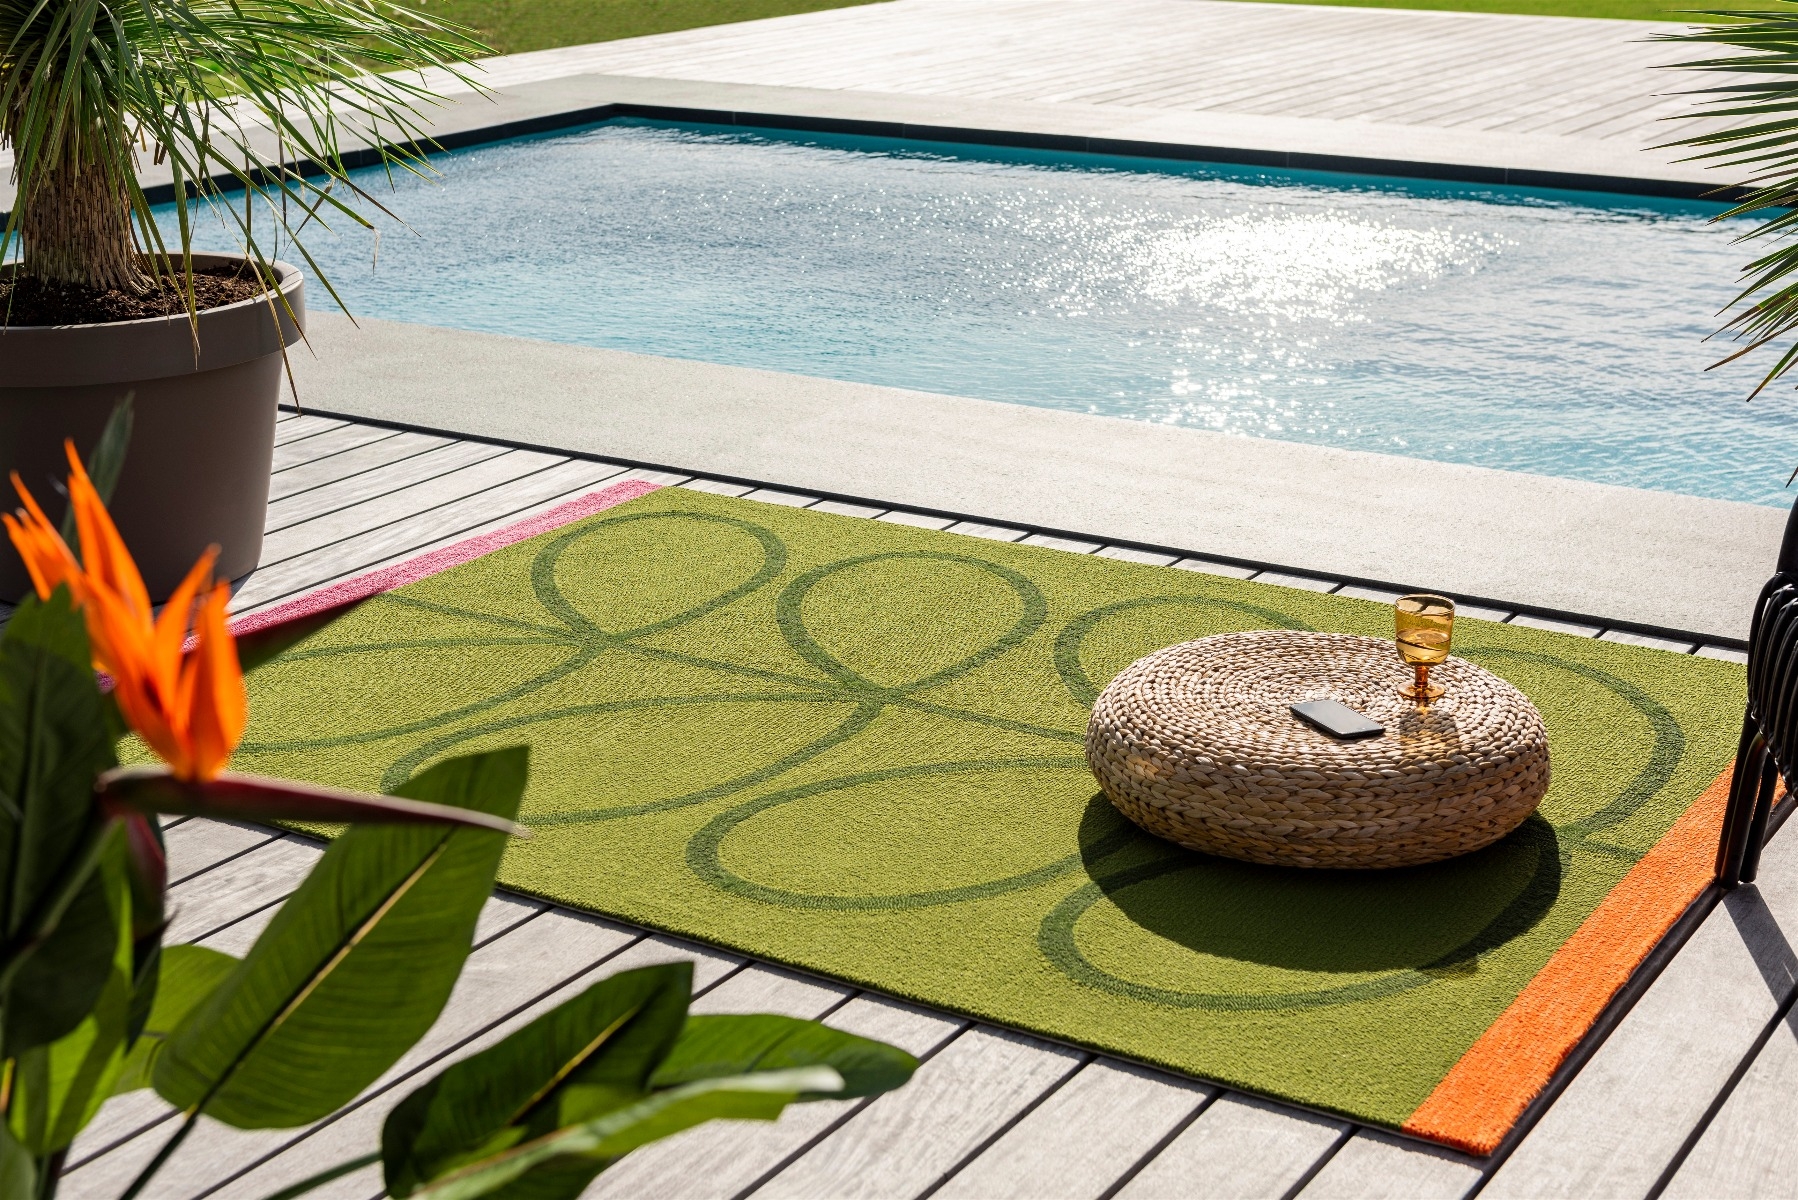 Giant Linear St Seagrass Outdoor 460607 Rug ☞ Size: 200 x 280 cm